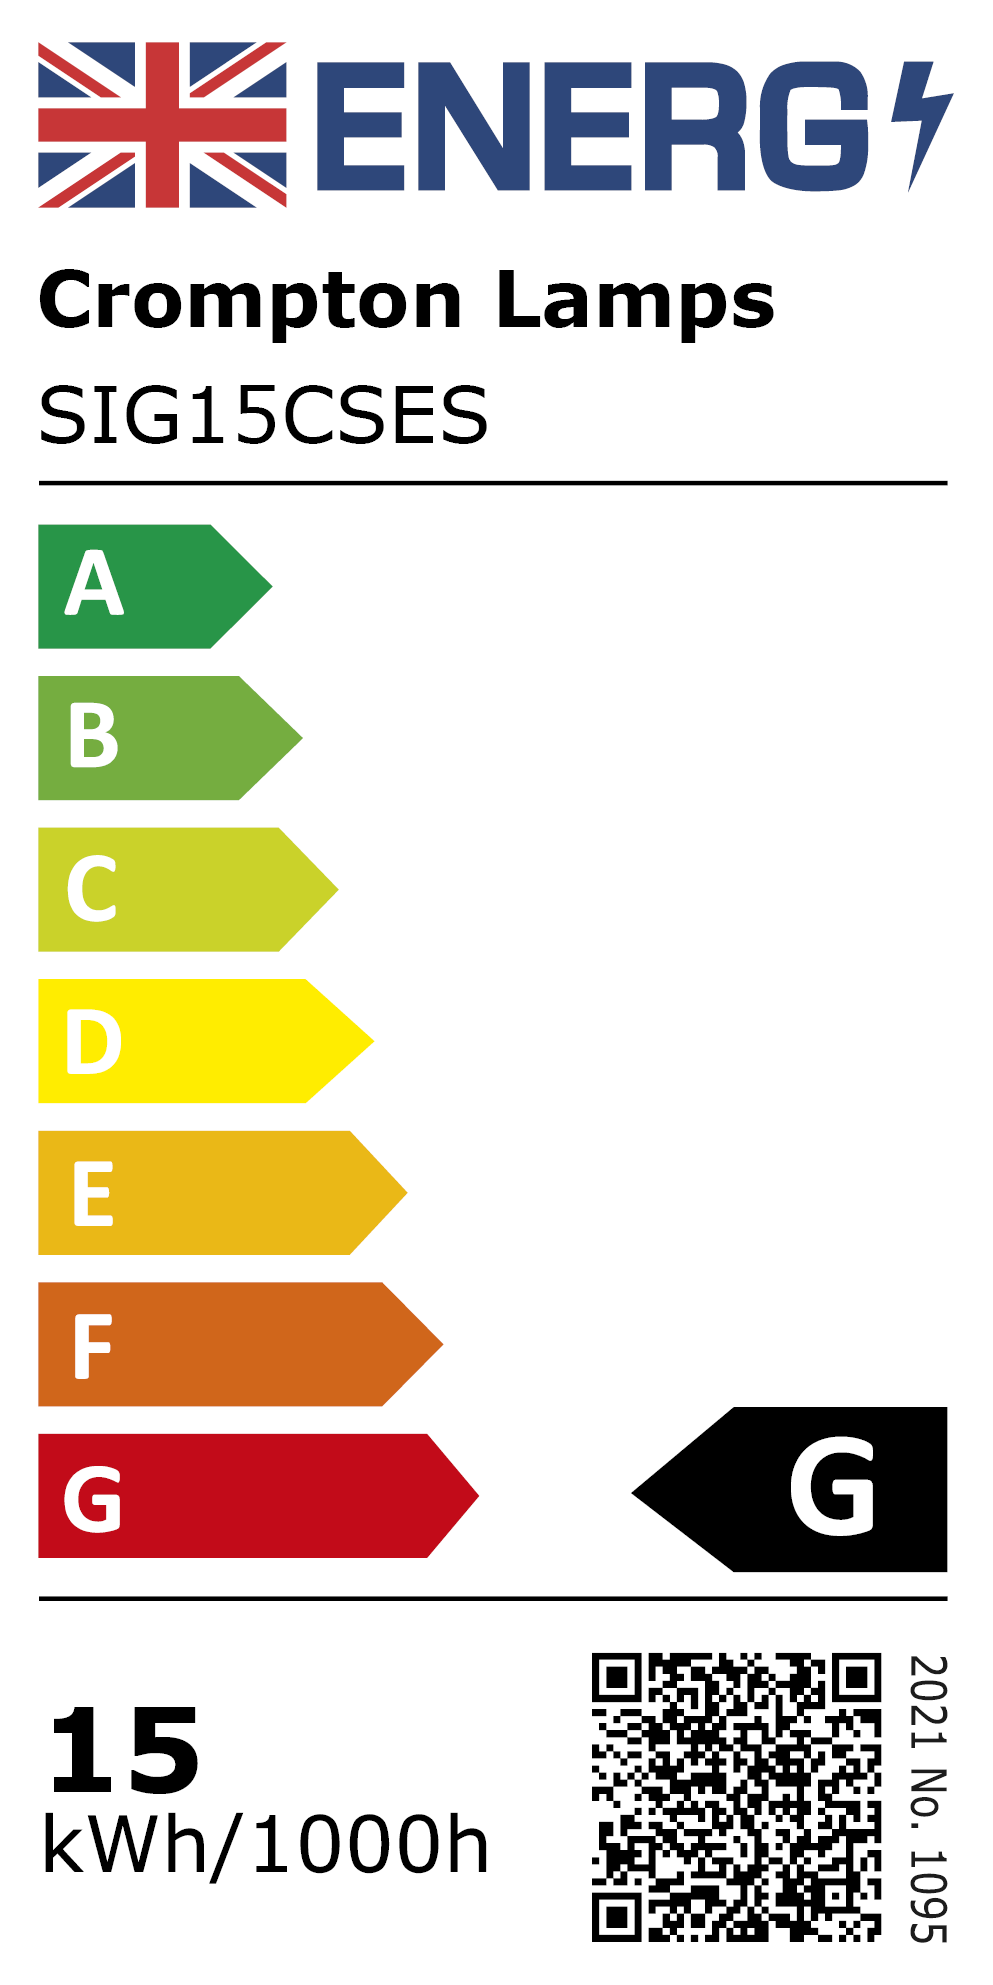 New 2021 Energy Rating Label: Stock Code SIG15CSES